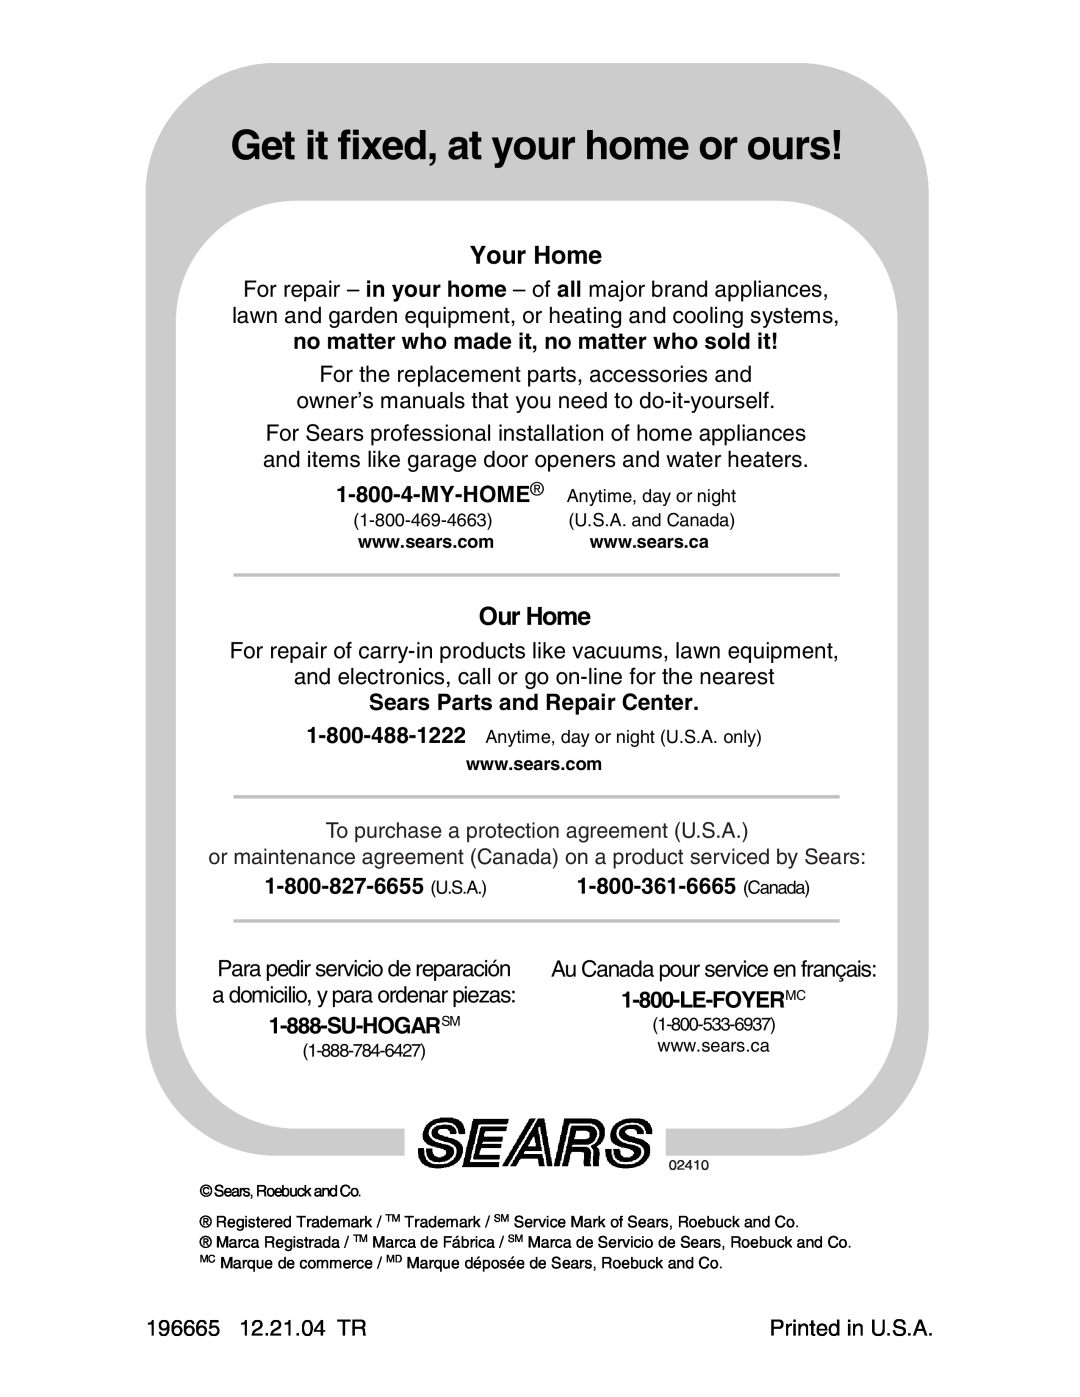 Sears 917.29425 Get it fixed, at your home or ours, Your Home, Our Home, My-Home, Sears Parts and Repair Center 